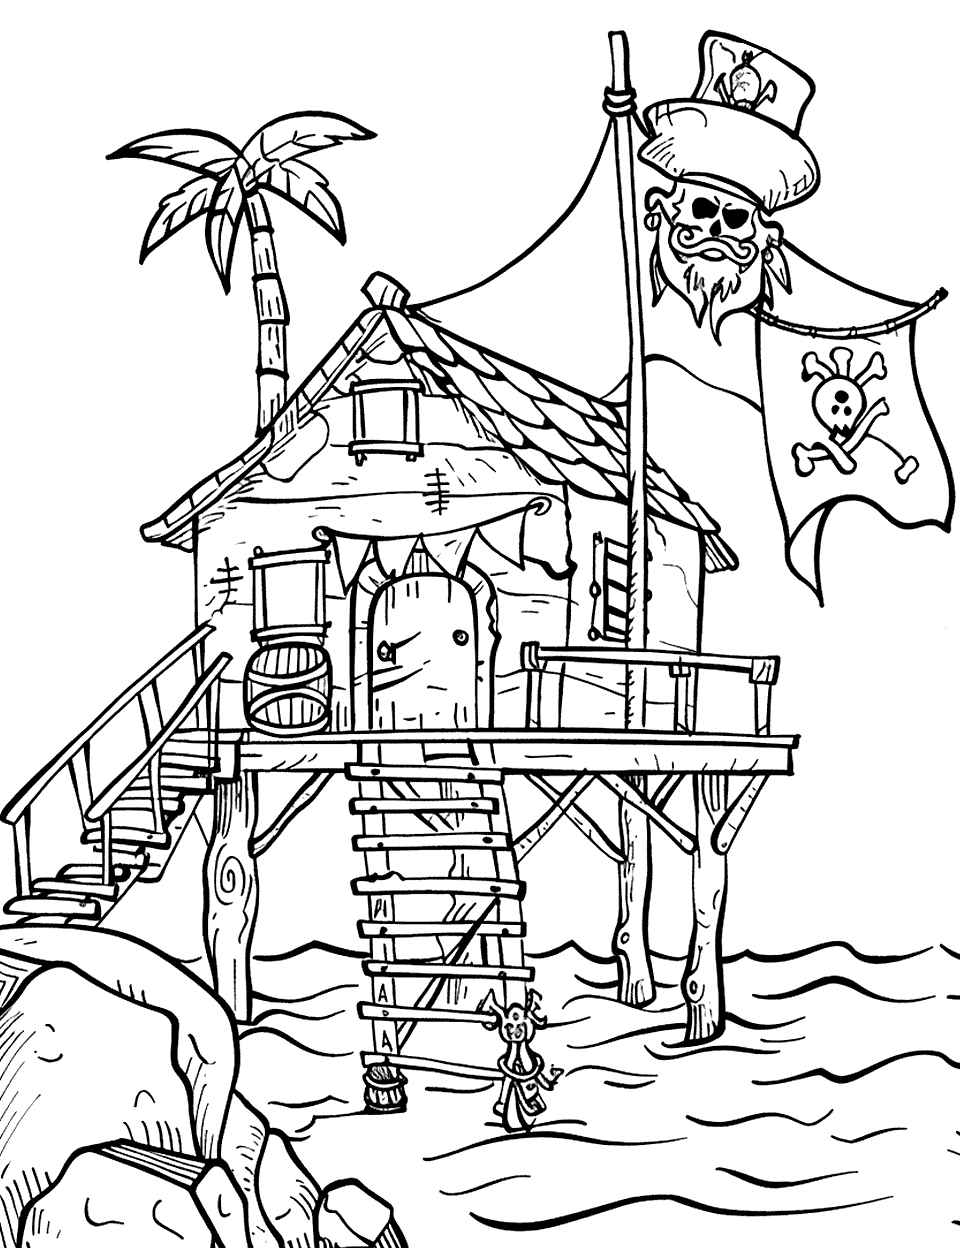 Caribbean Pirate Haven Coloring Page - A scenic view of a pirate hideout nestled in the Caribbean island.